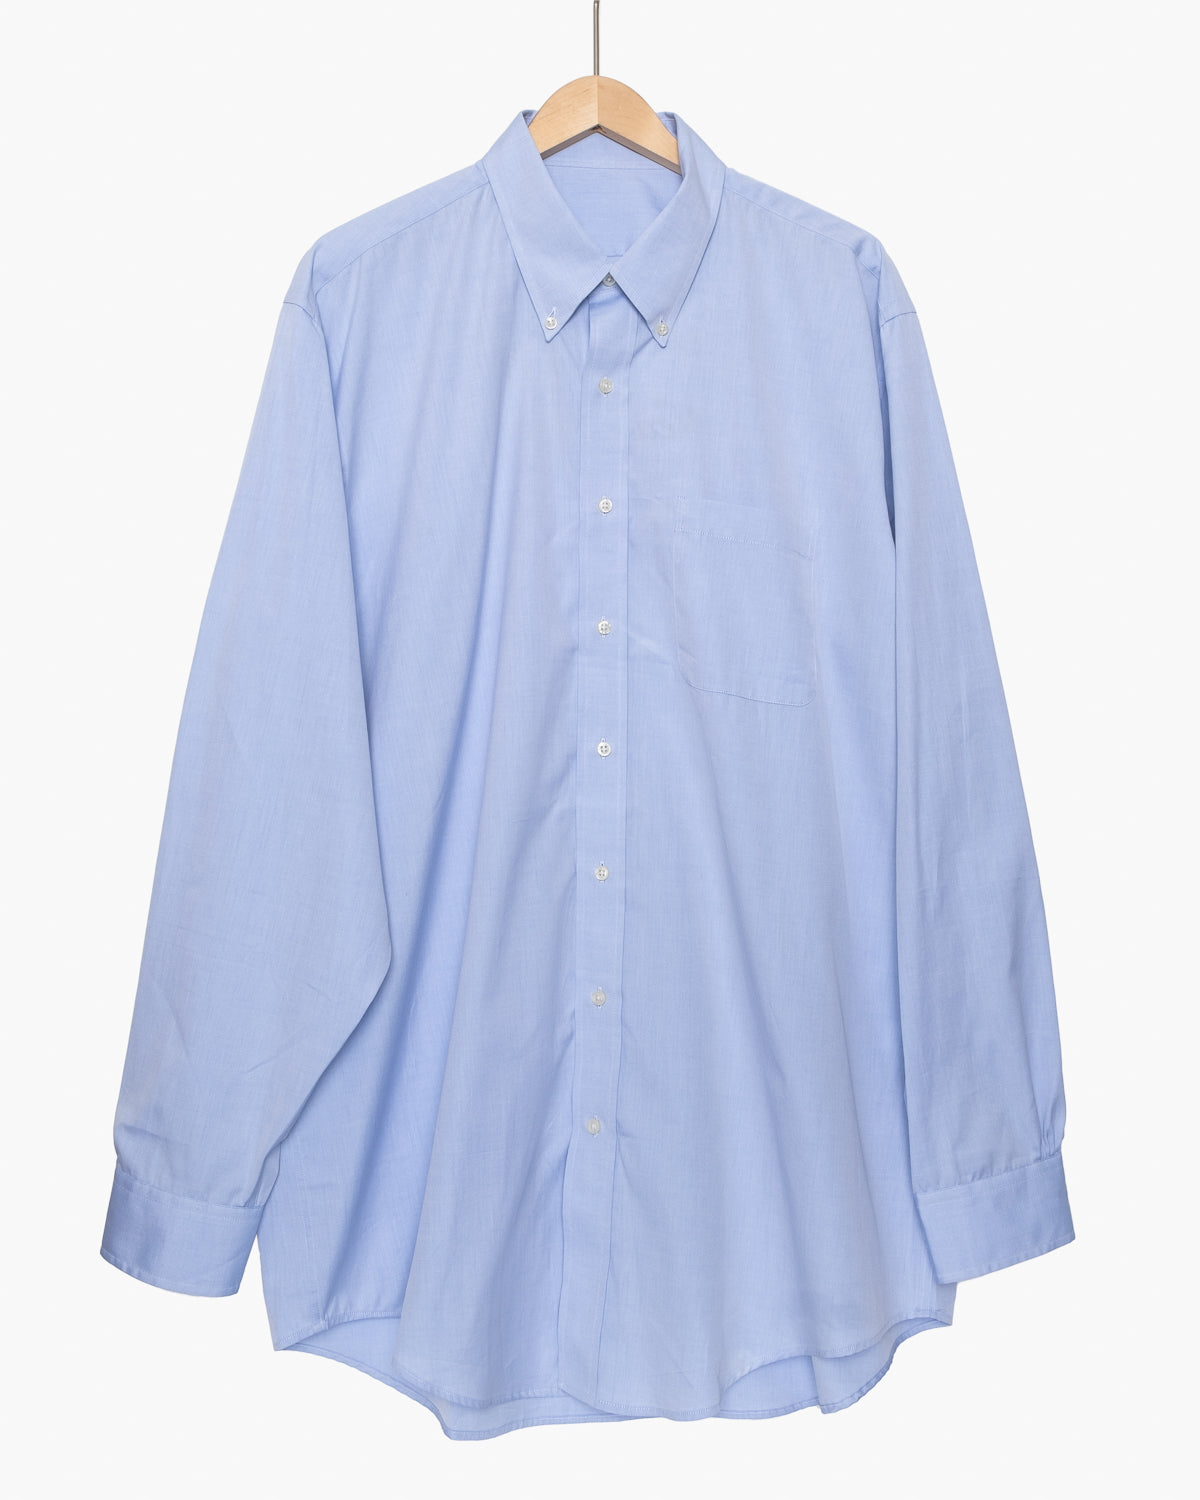 The Oversized Button Down